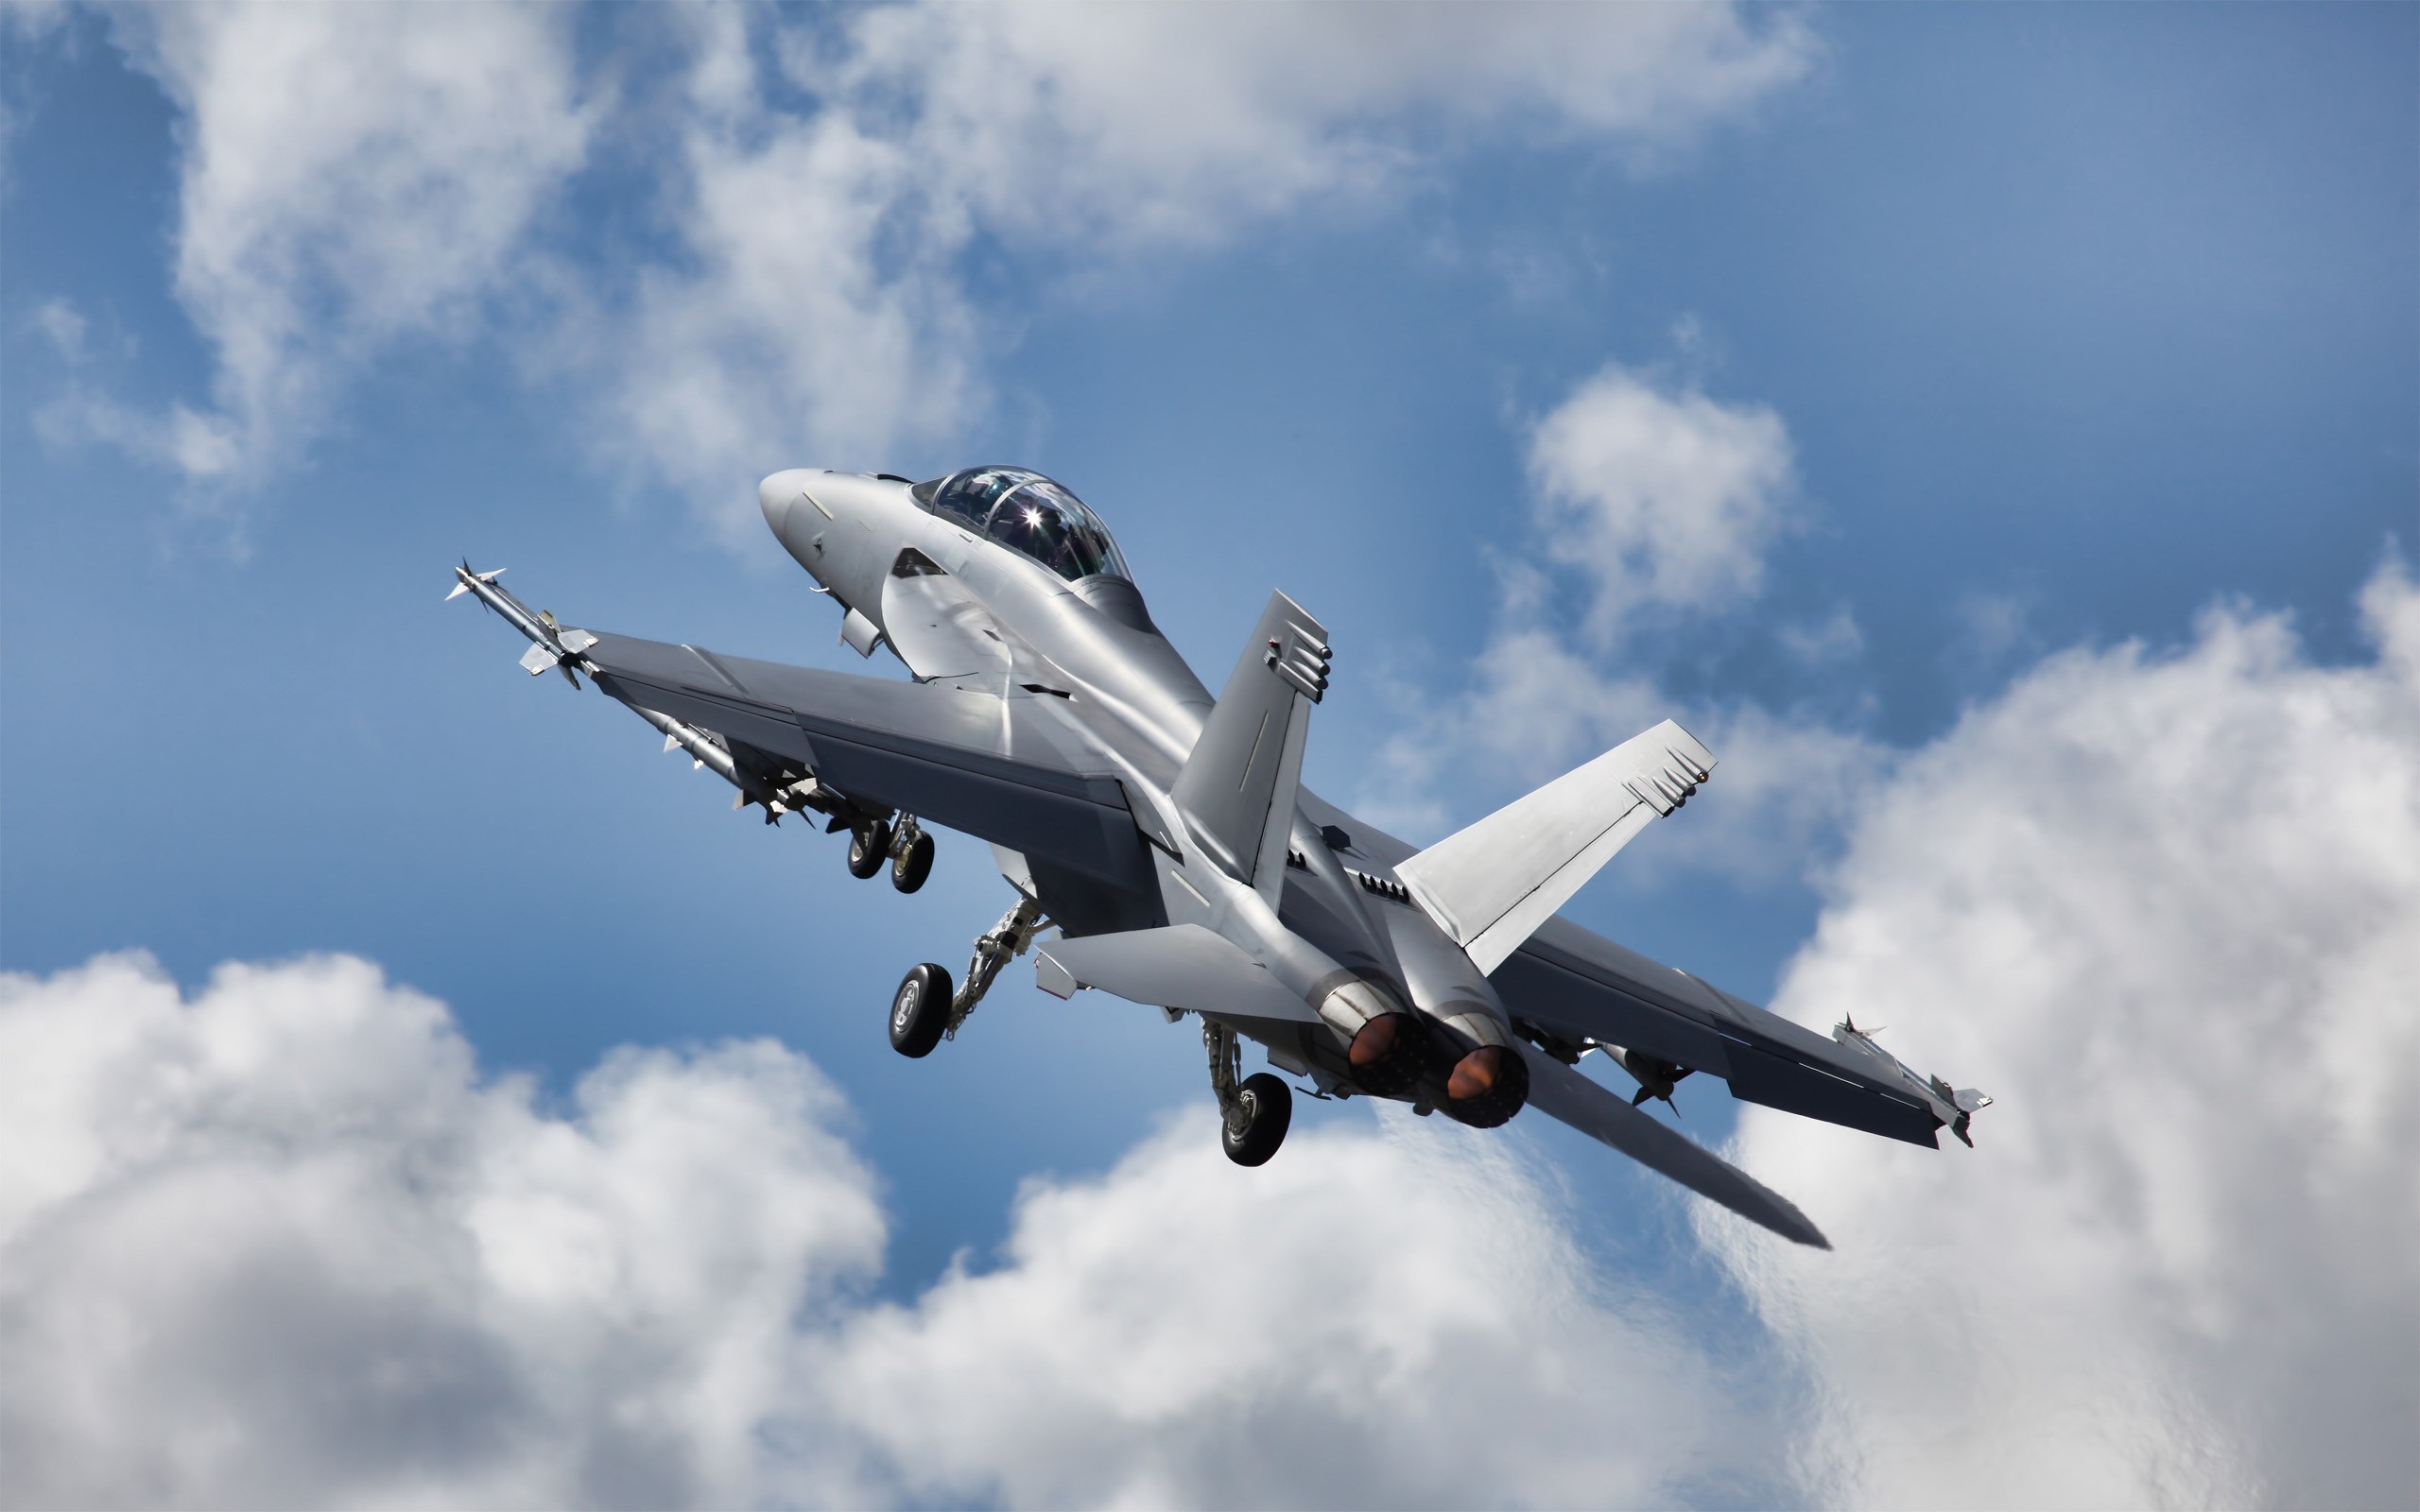 clouds, Aircraft, Scenic, Vehicles, F 18, Hornet, Aviation, Skyscapes Wallpaper